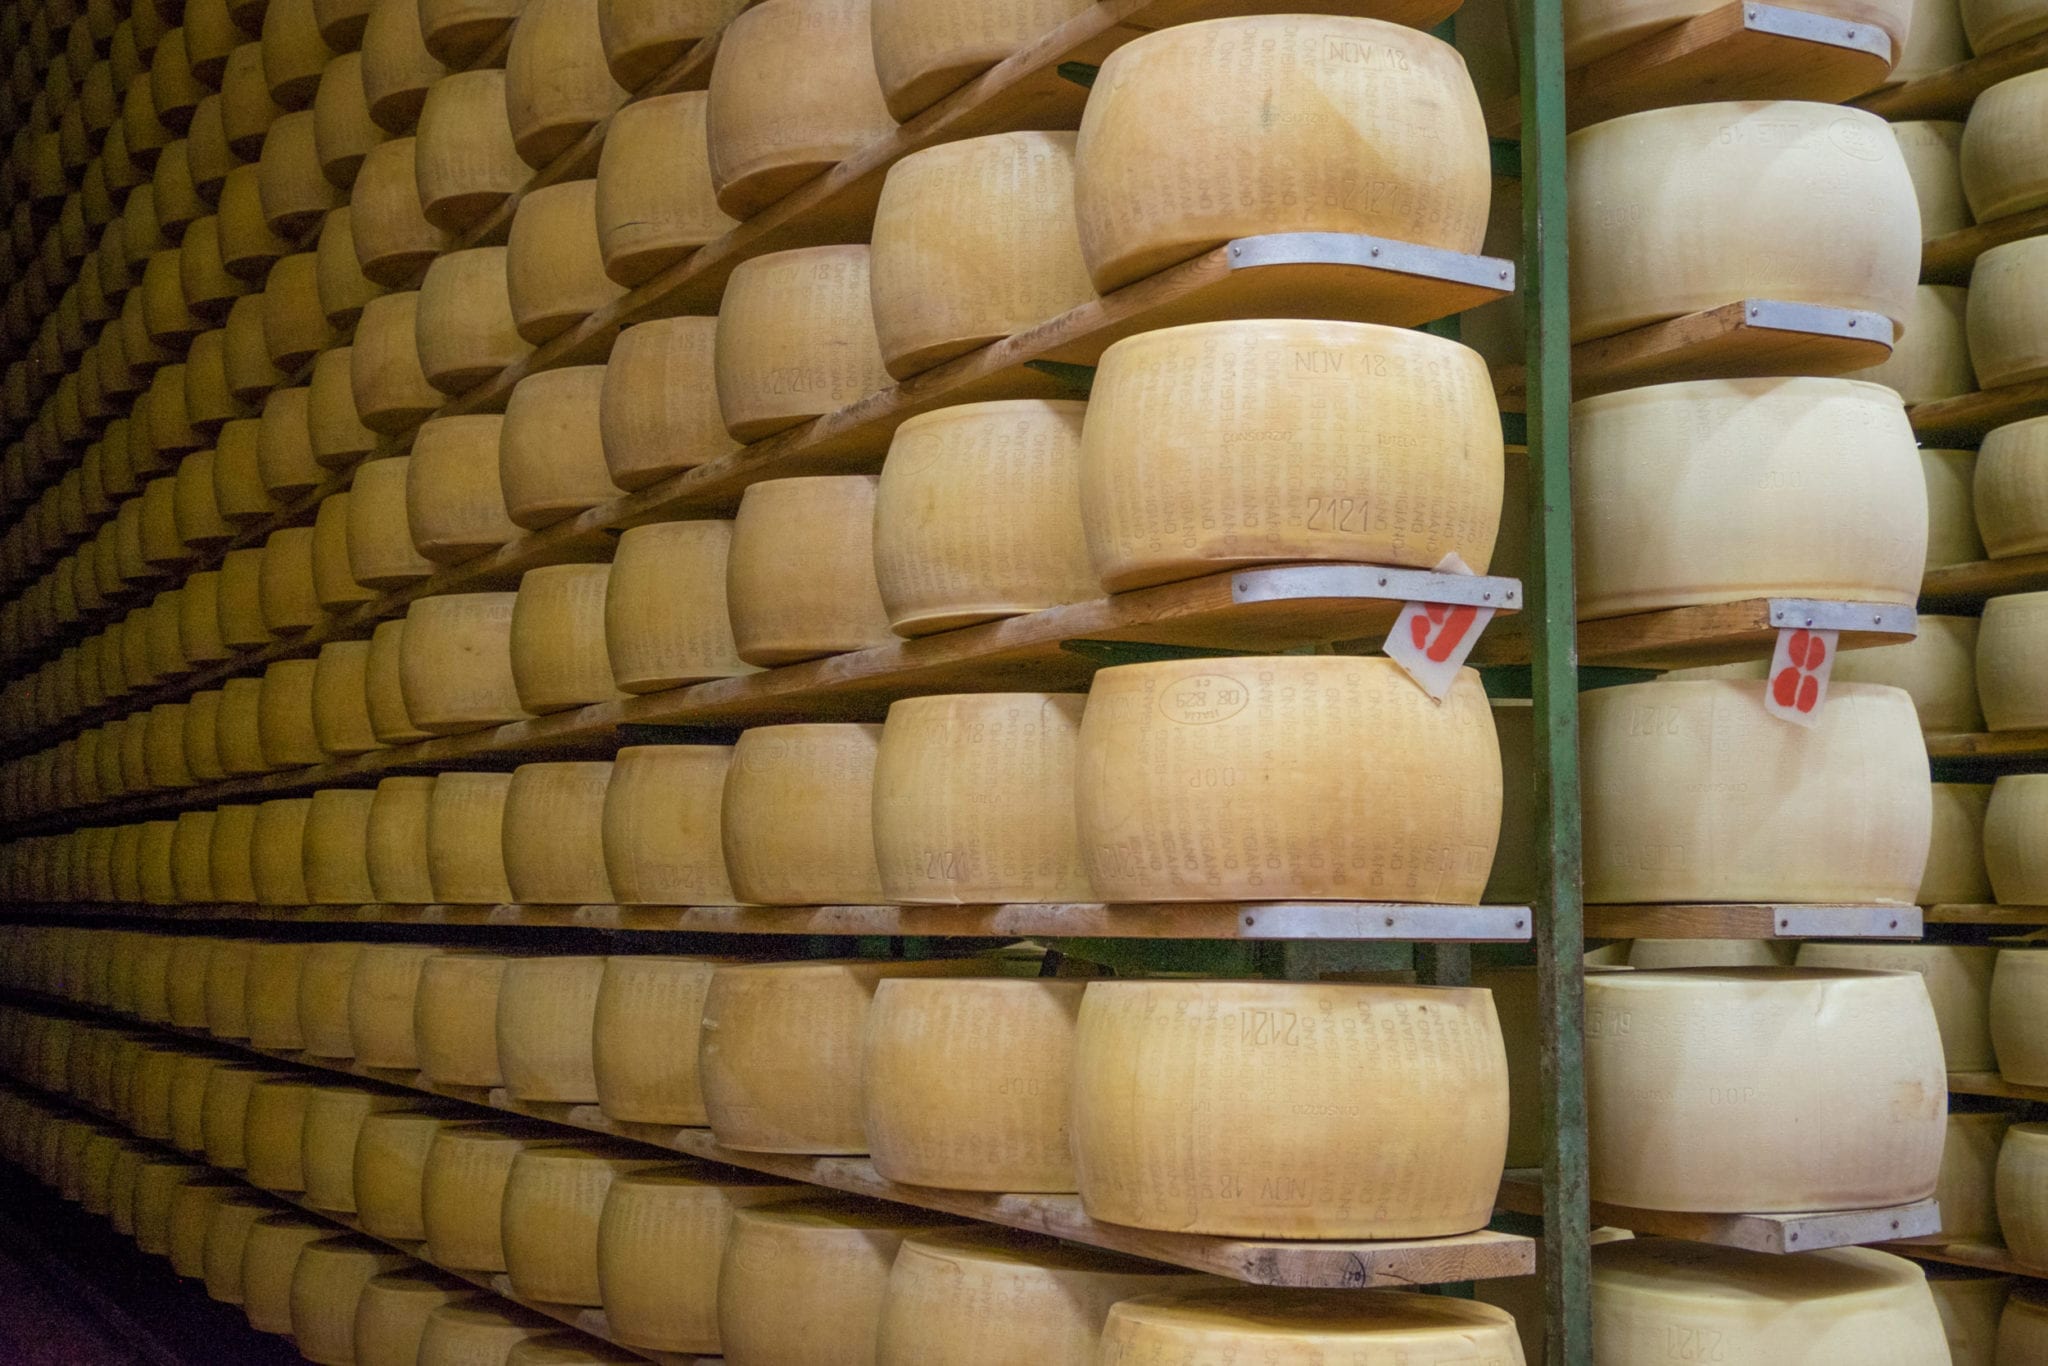 Rows and stacks of Parmigiano Reggiano wheels on shelves.